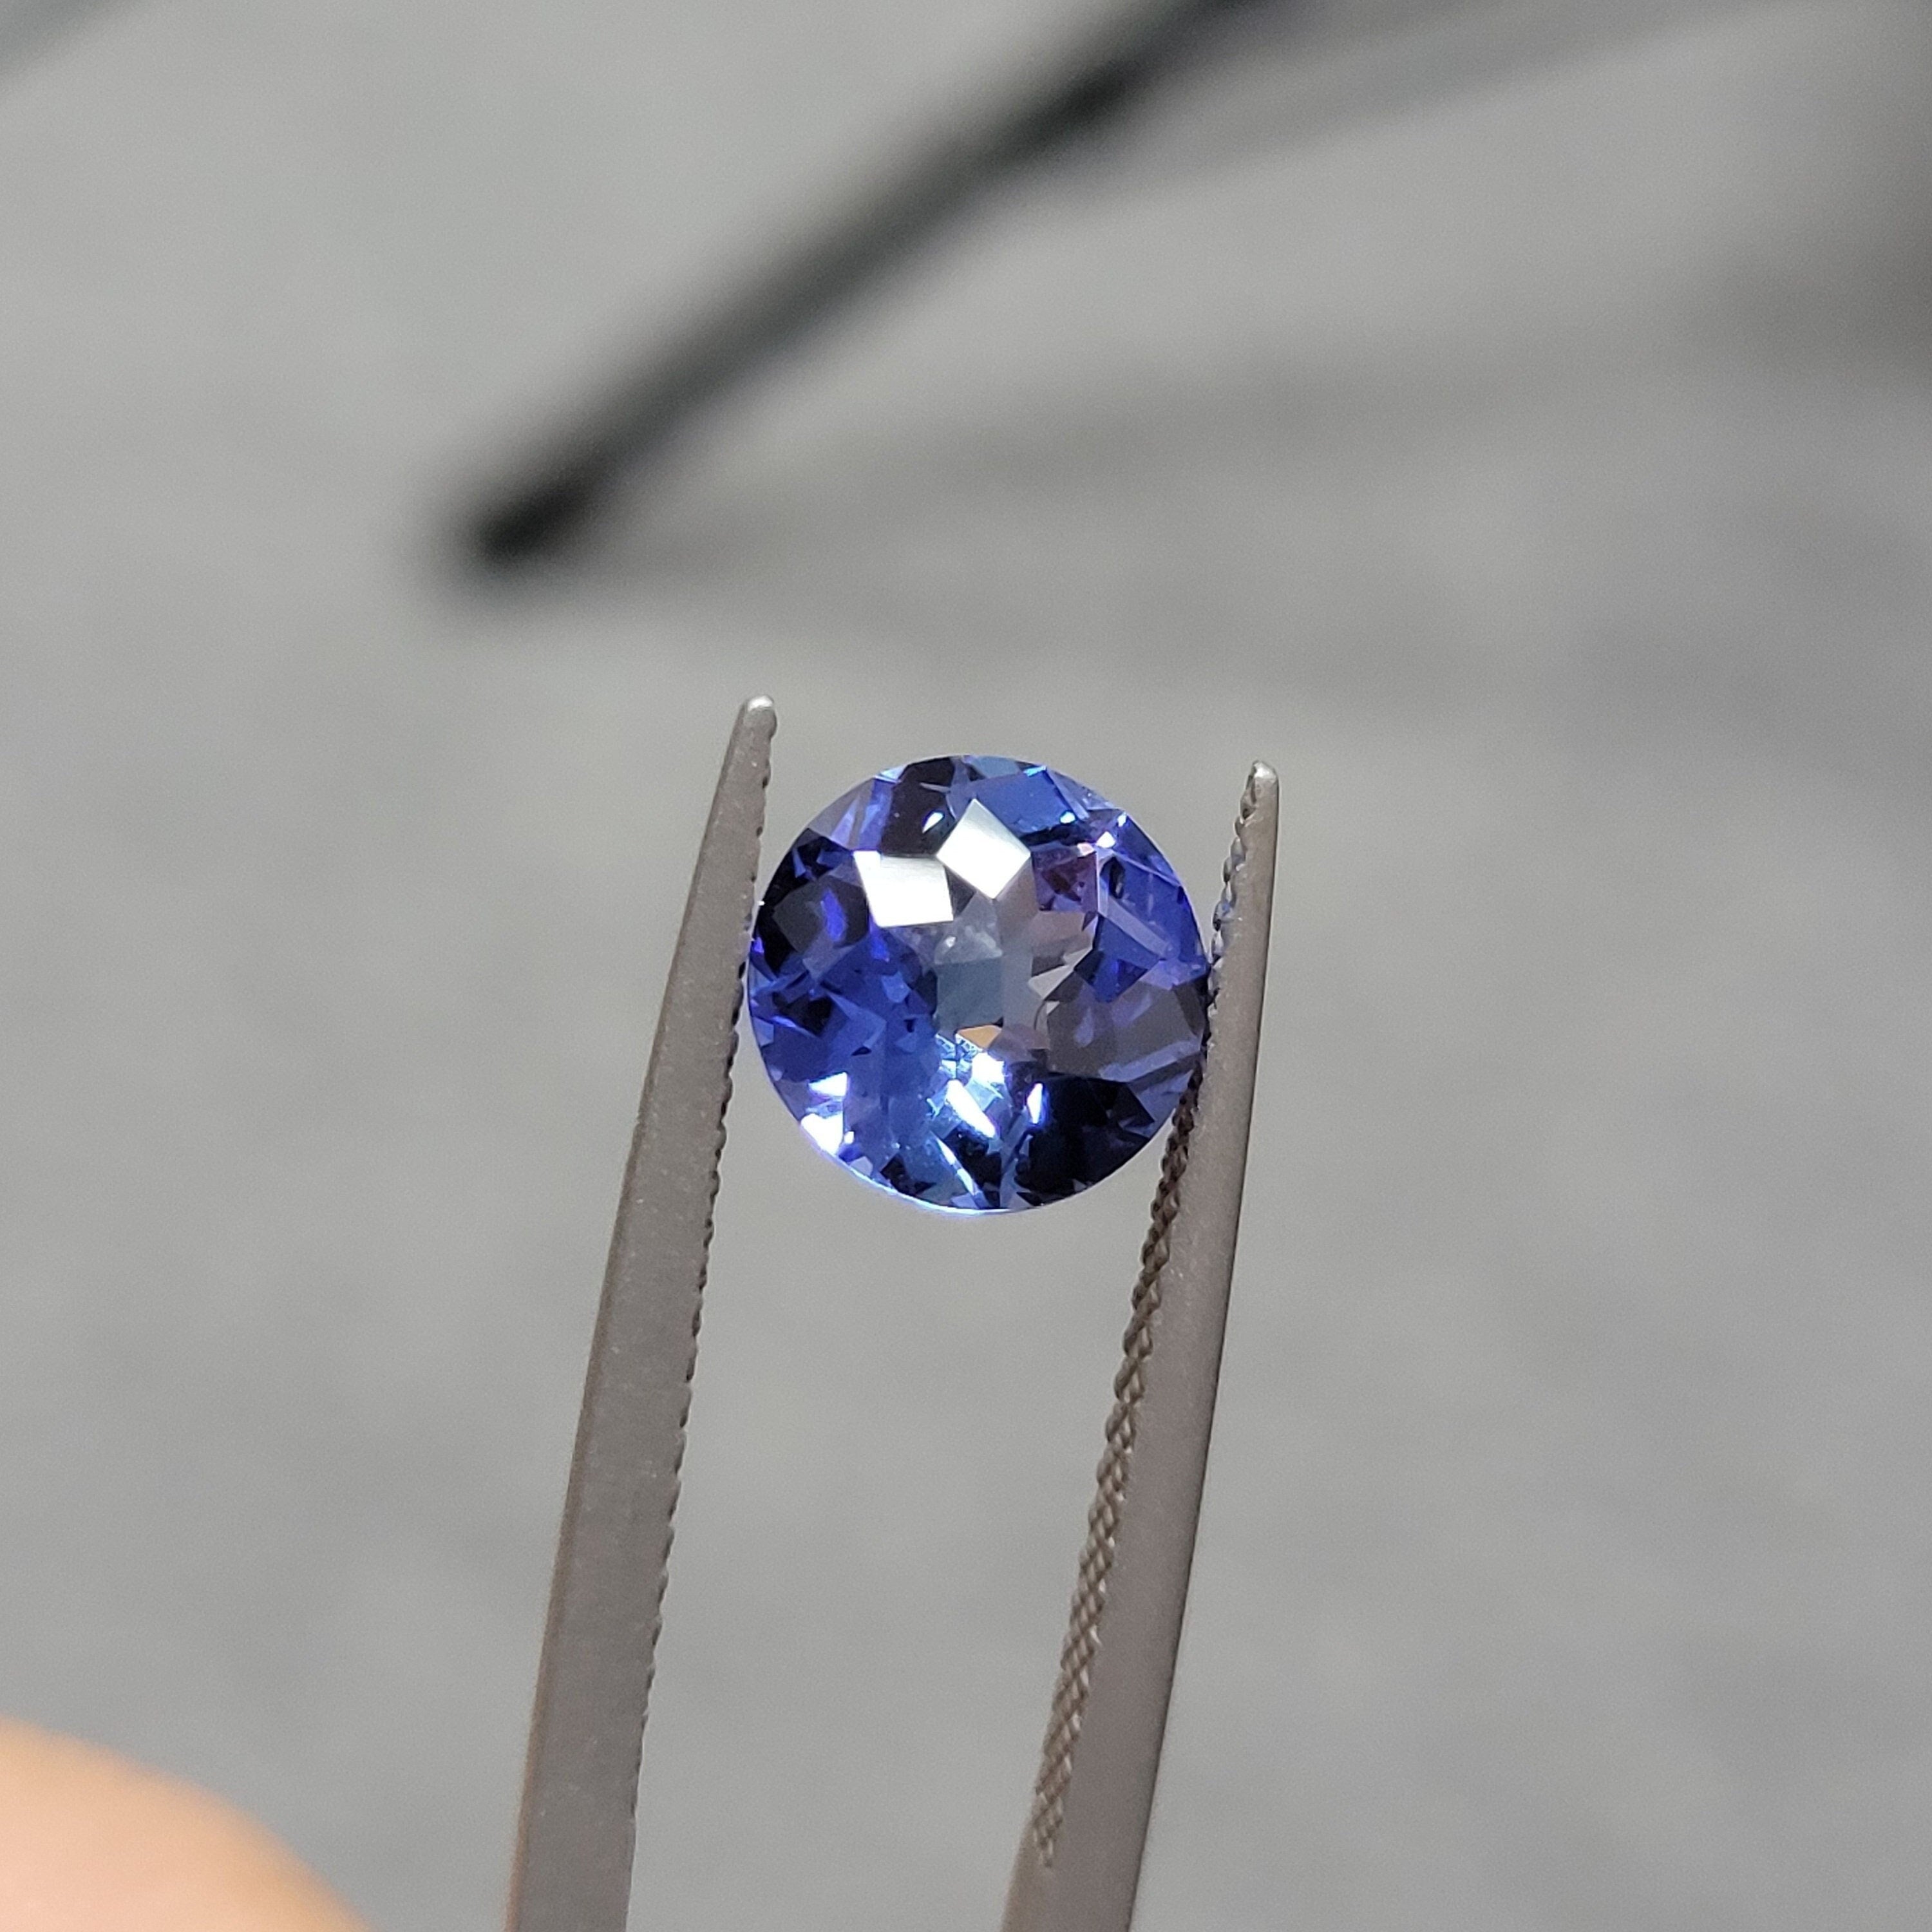 8mm loose sapphire 2.4ct lab grown imperial round faceted ceylon sapphire, blue gemstone